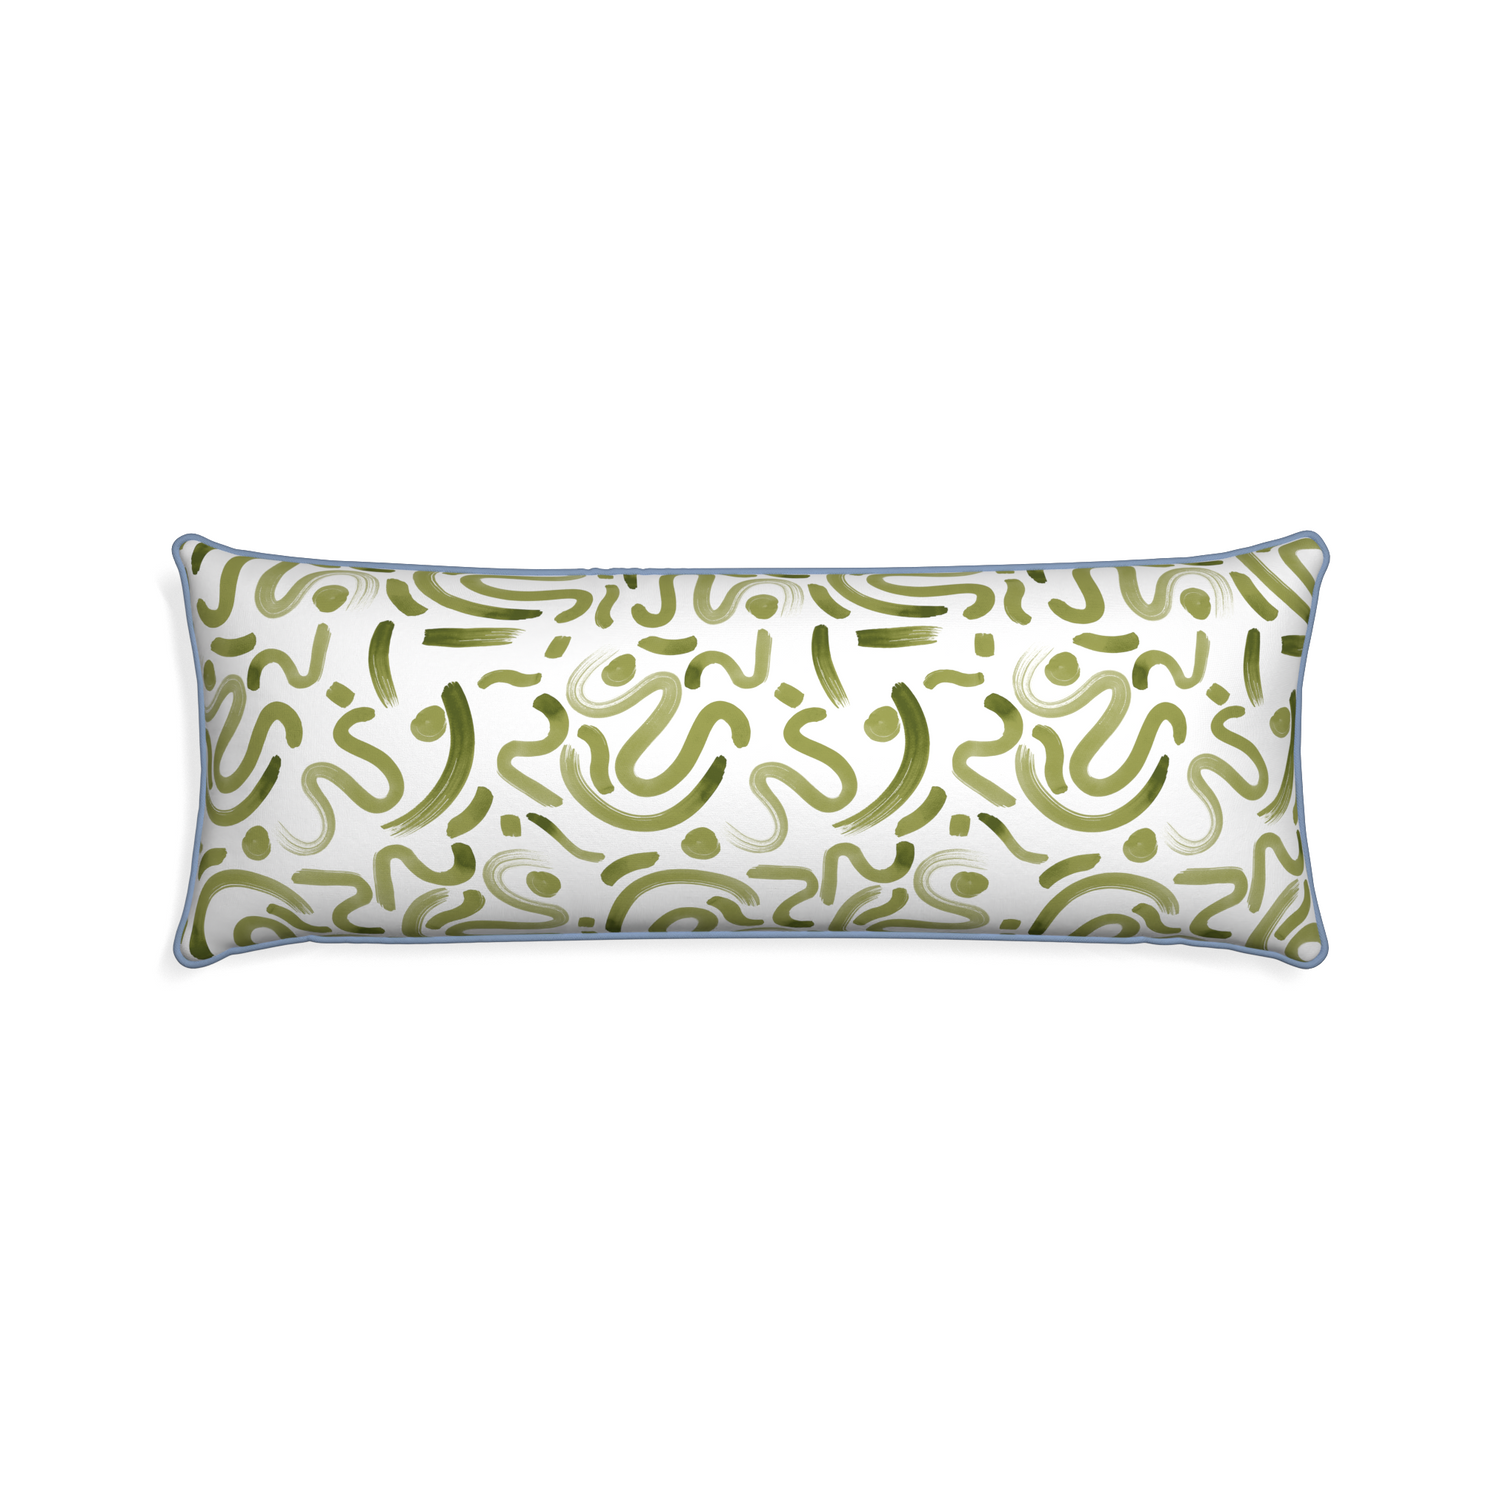 Xl-lumbar hockney moss custom moss greenpillow with sky piping on white background